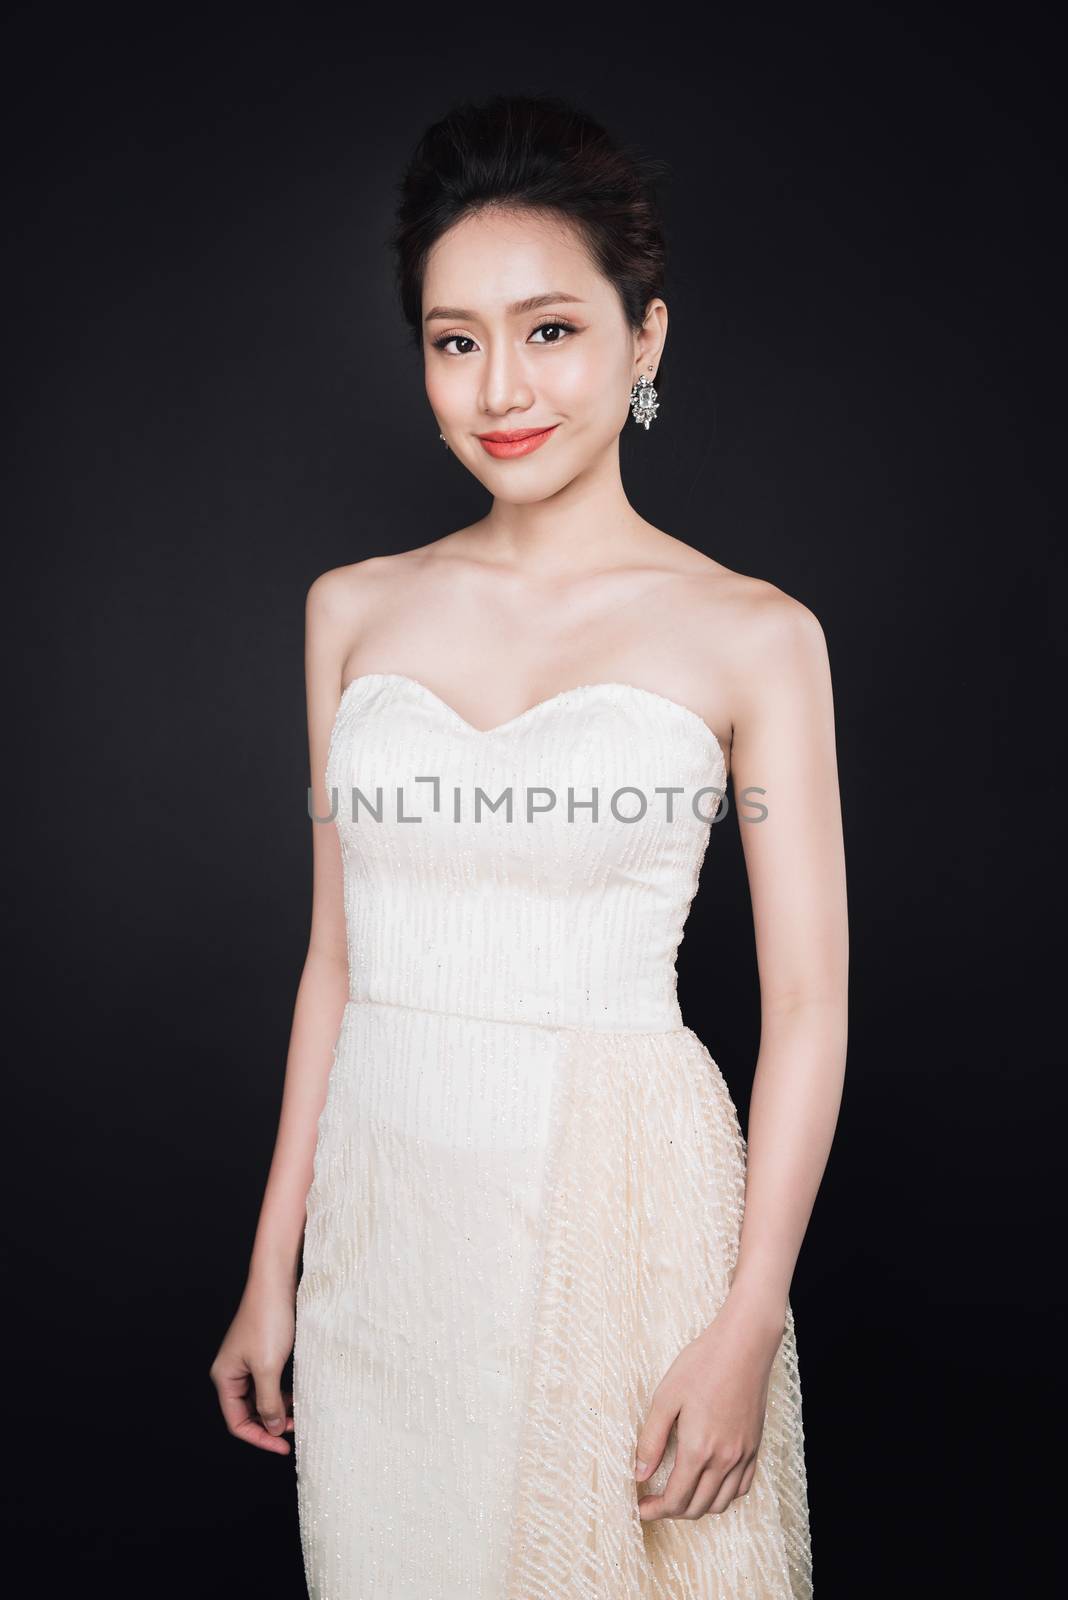 Fashion portrait of beautiful young asian woman in white dress over dark background.